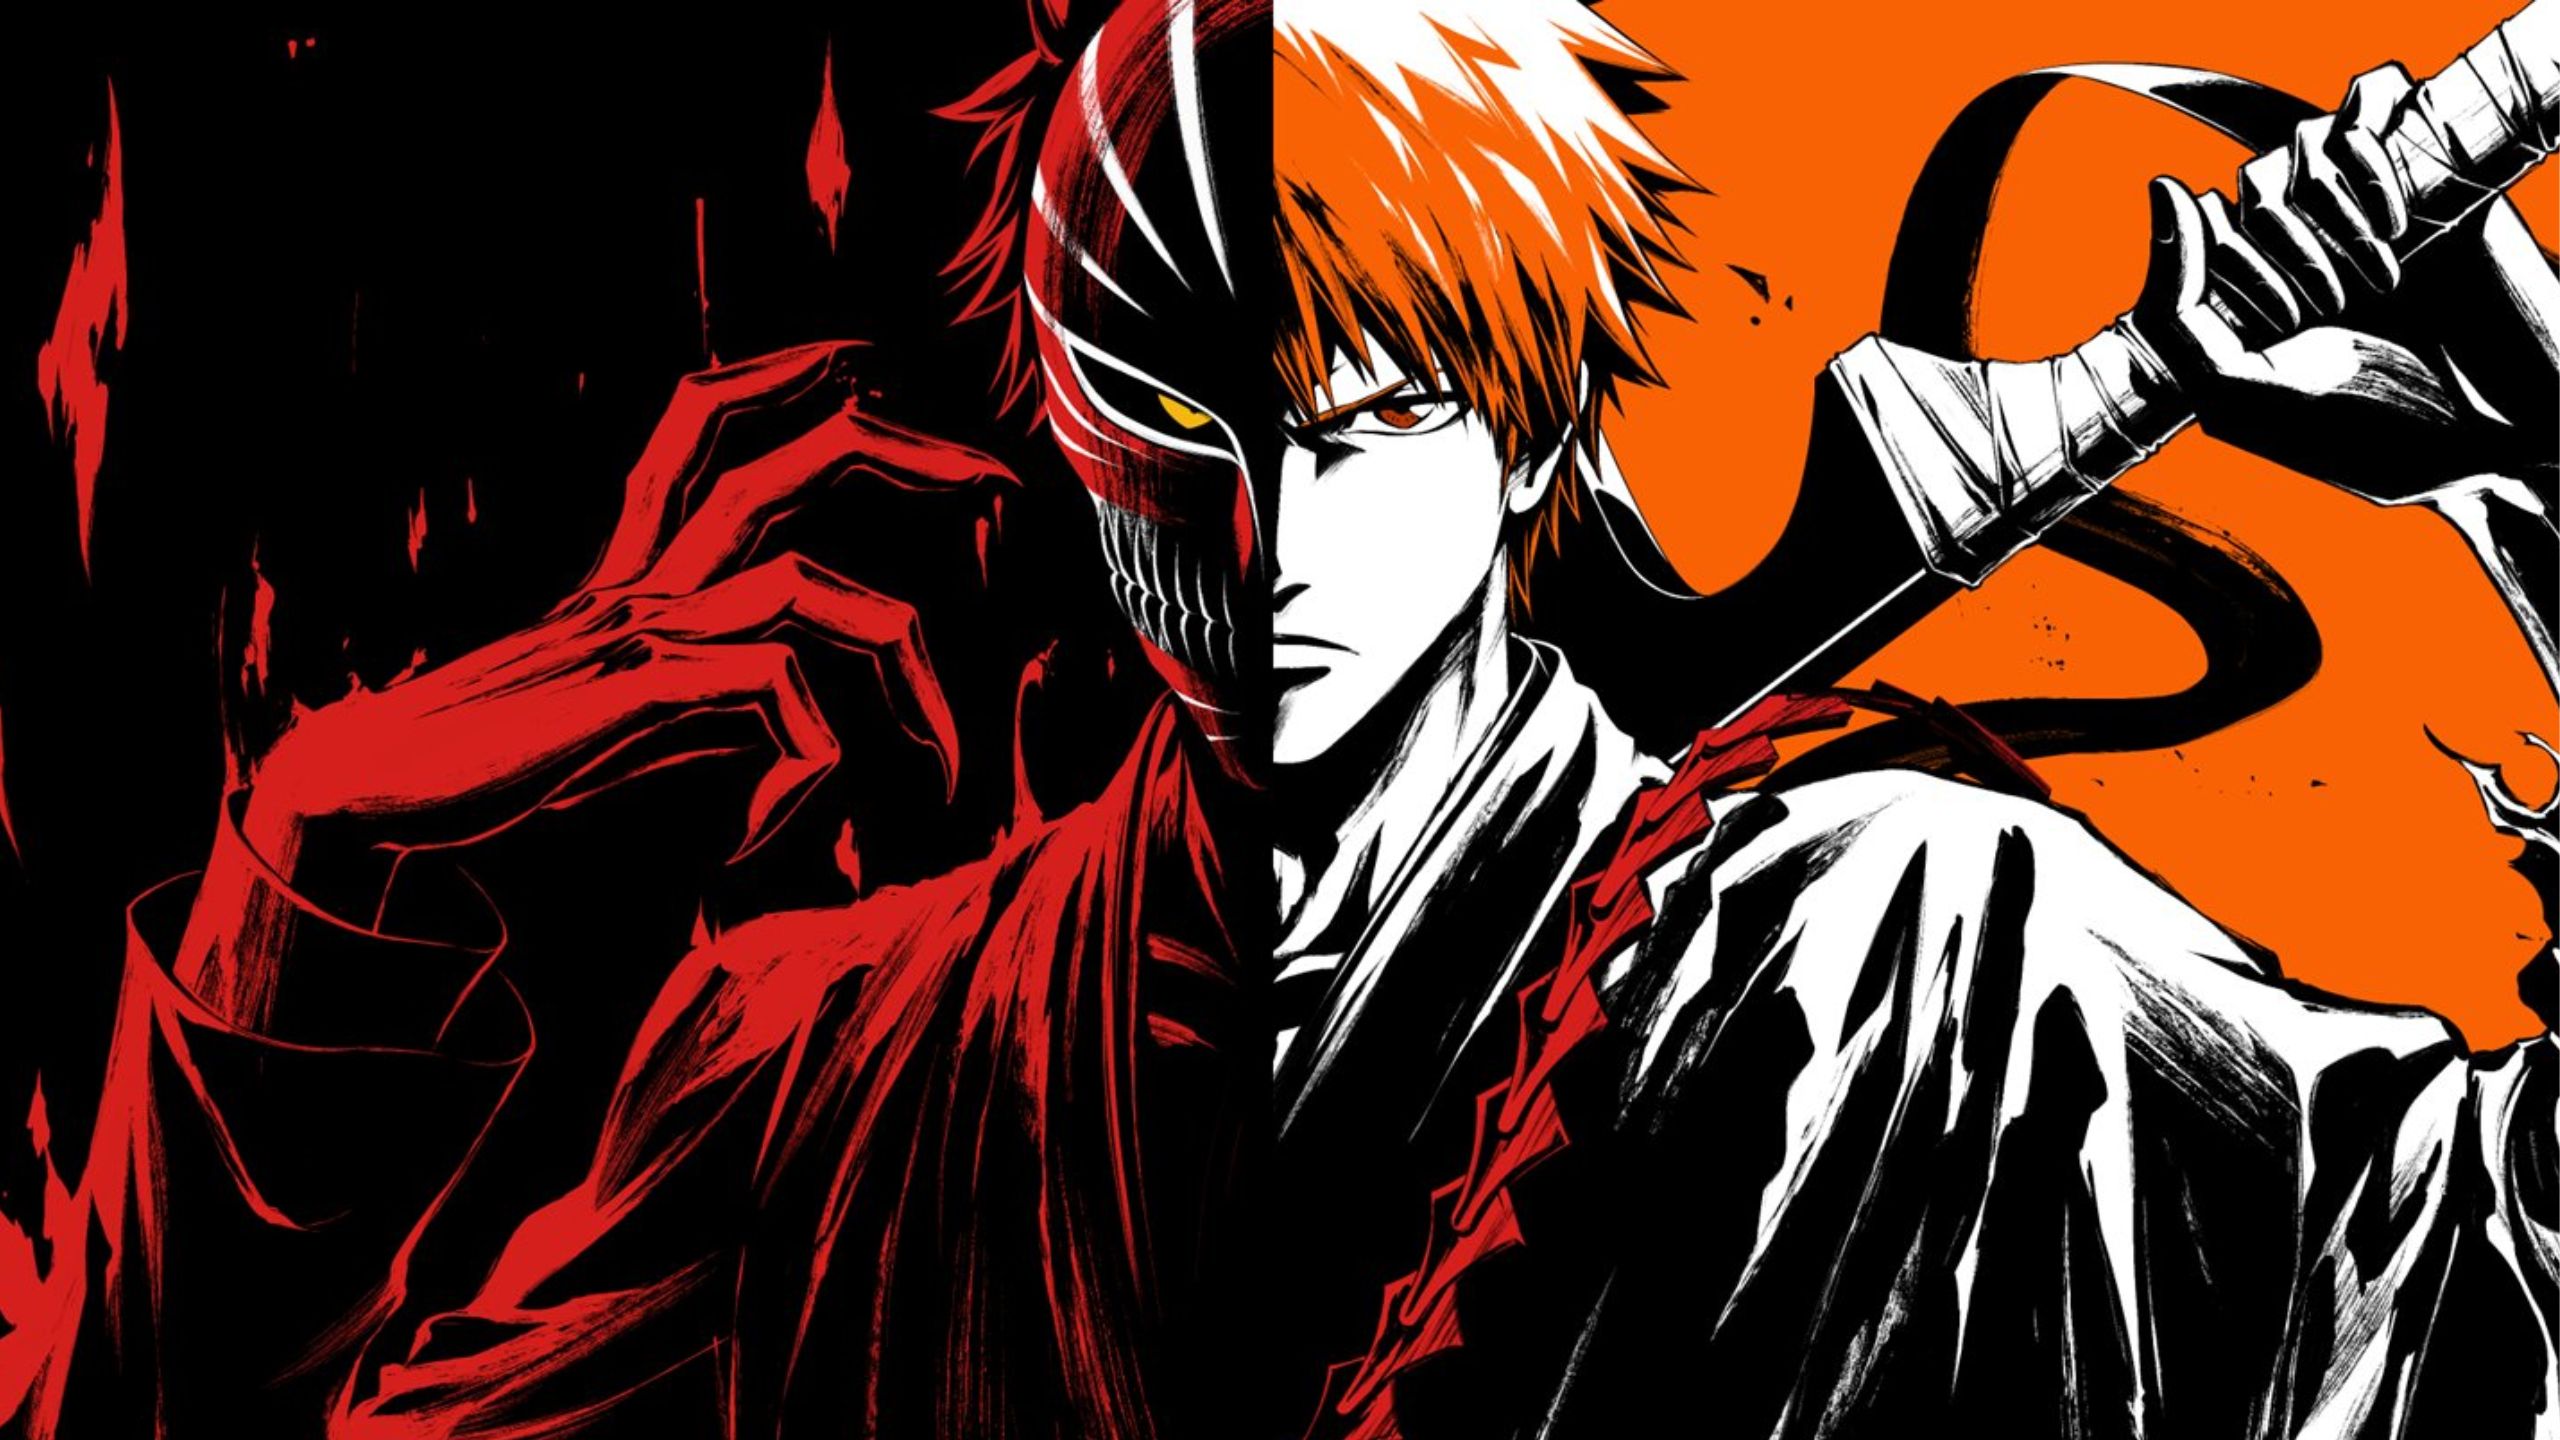 Bleach: TYBW Cour 3 Boosts Animation with Increased CGI Under Fresh Directorial Leadership